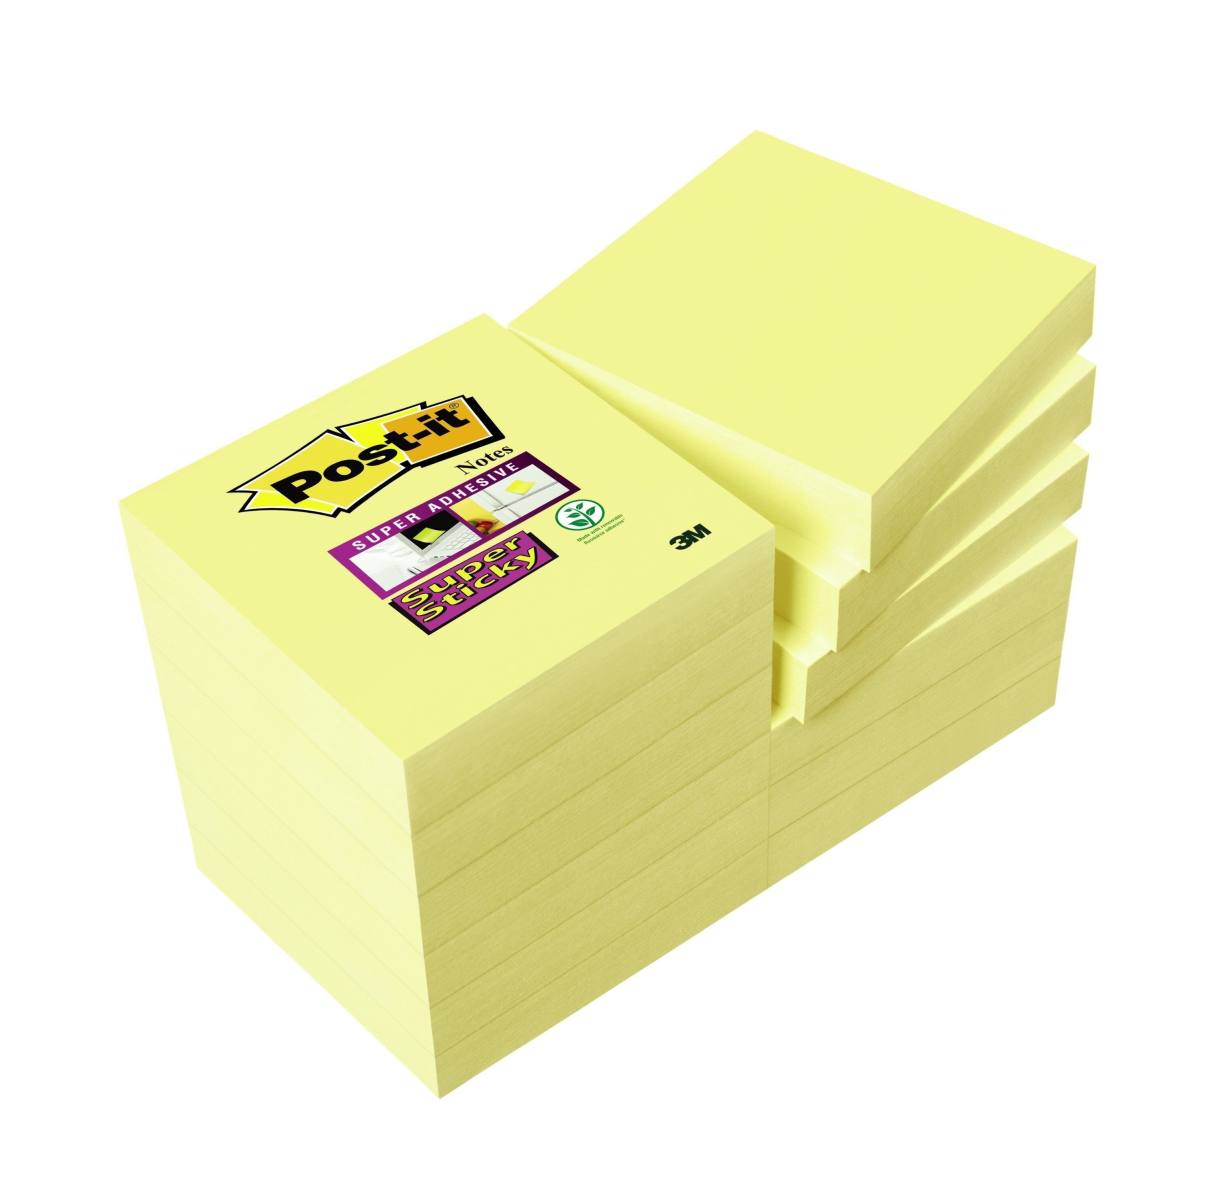 3M Post-it Super Sticky Notes 62212SY, 48 mm x 48 mm, yellow, 12 pads of 90 sheets each